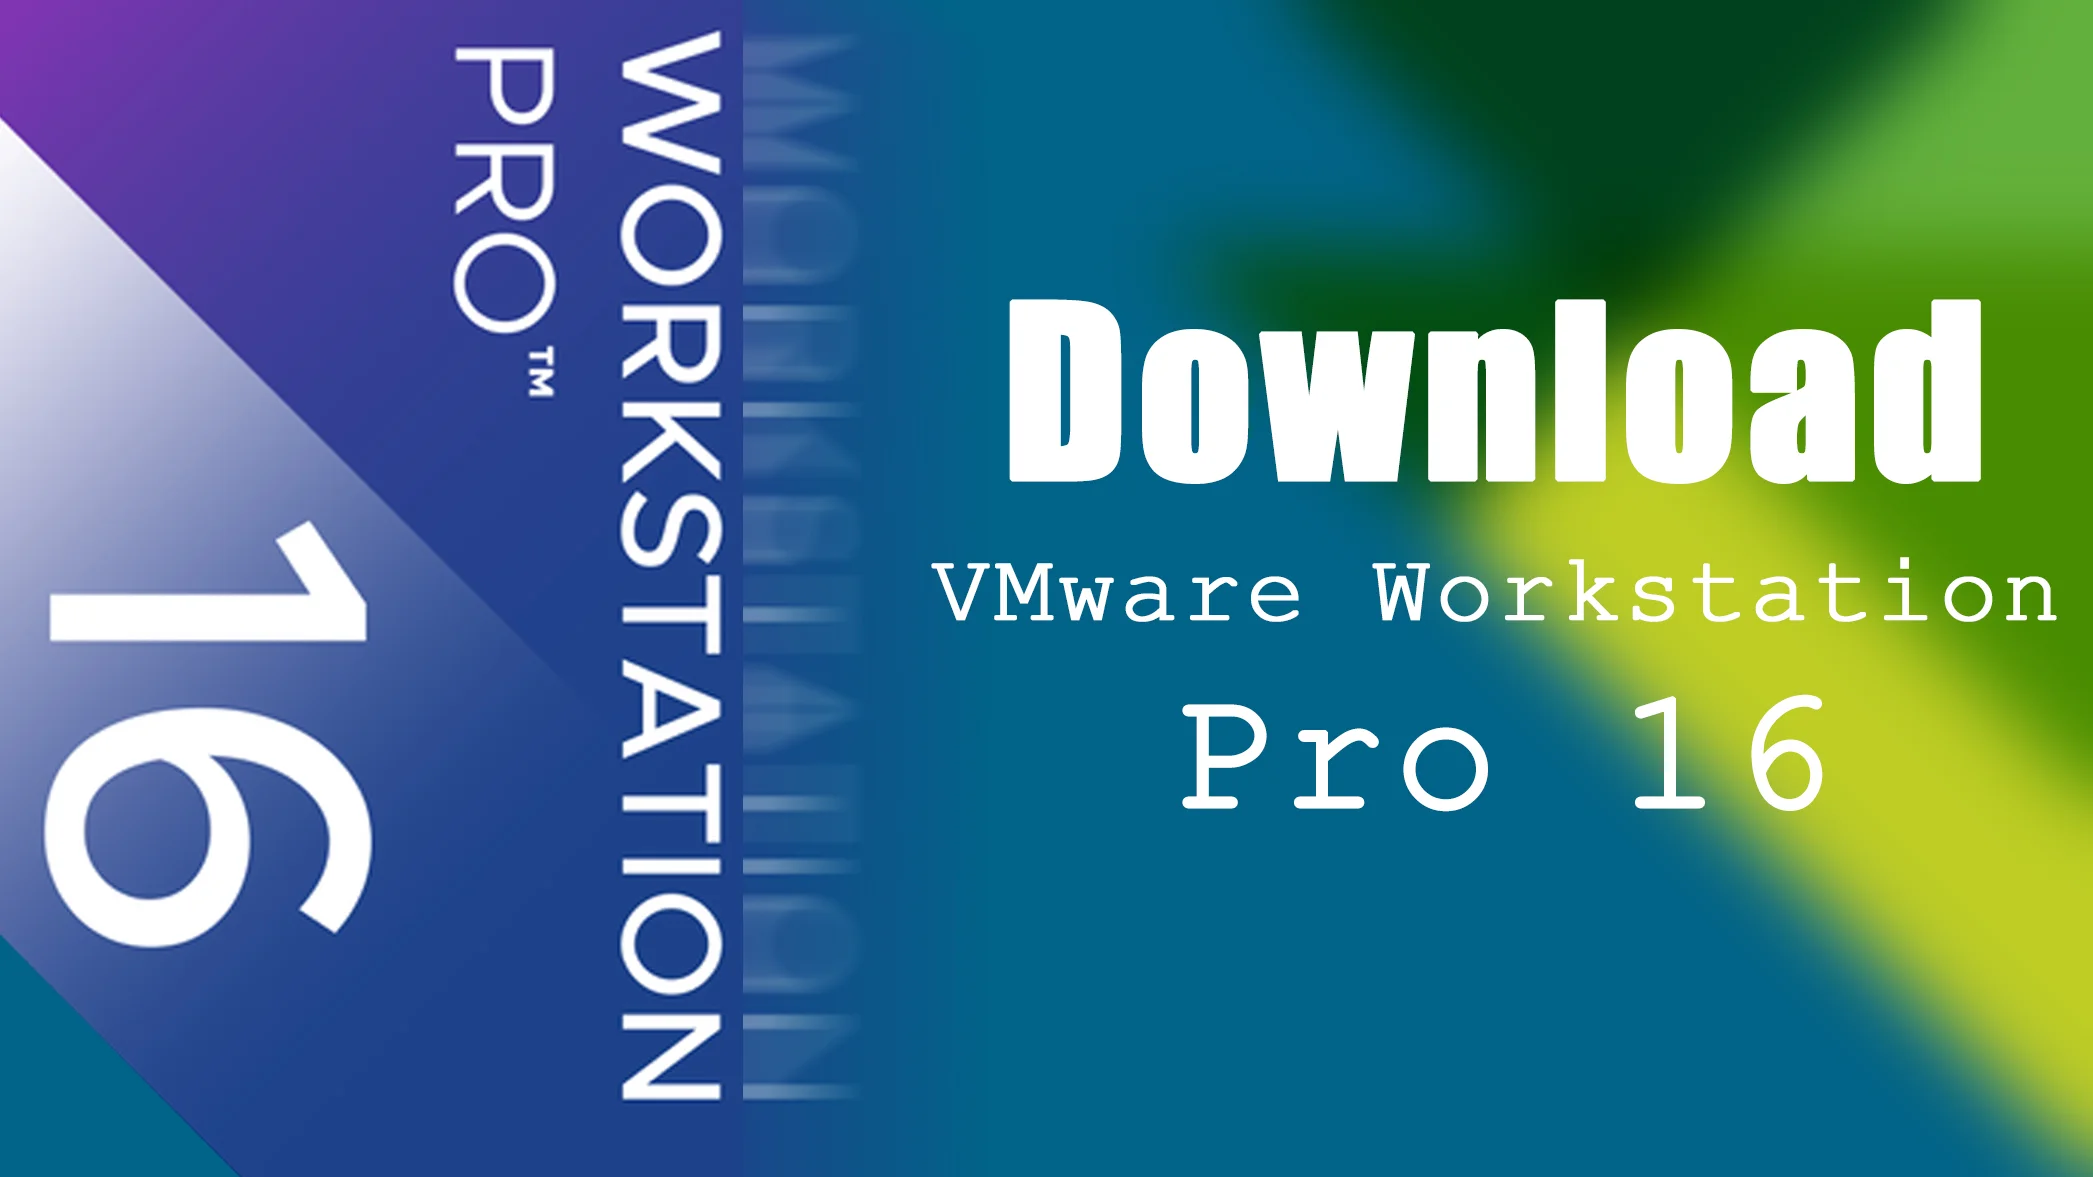 Download VMware Workstation Pro 16 For Free - Latest Version